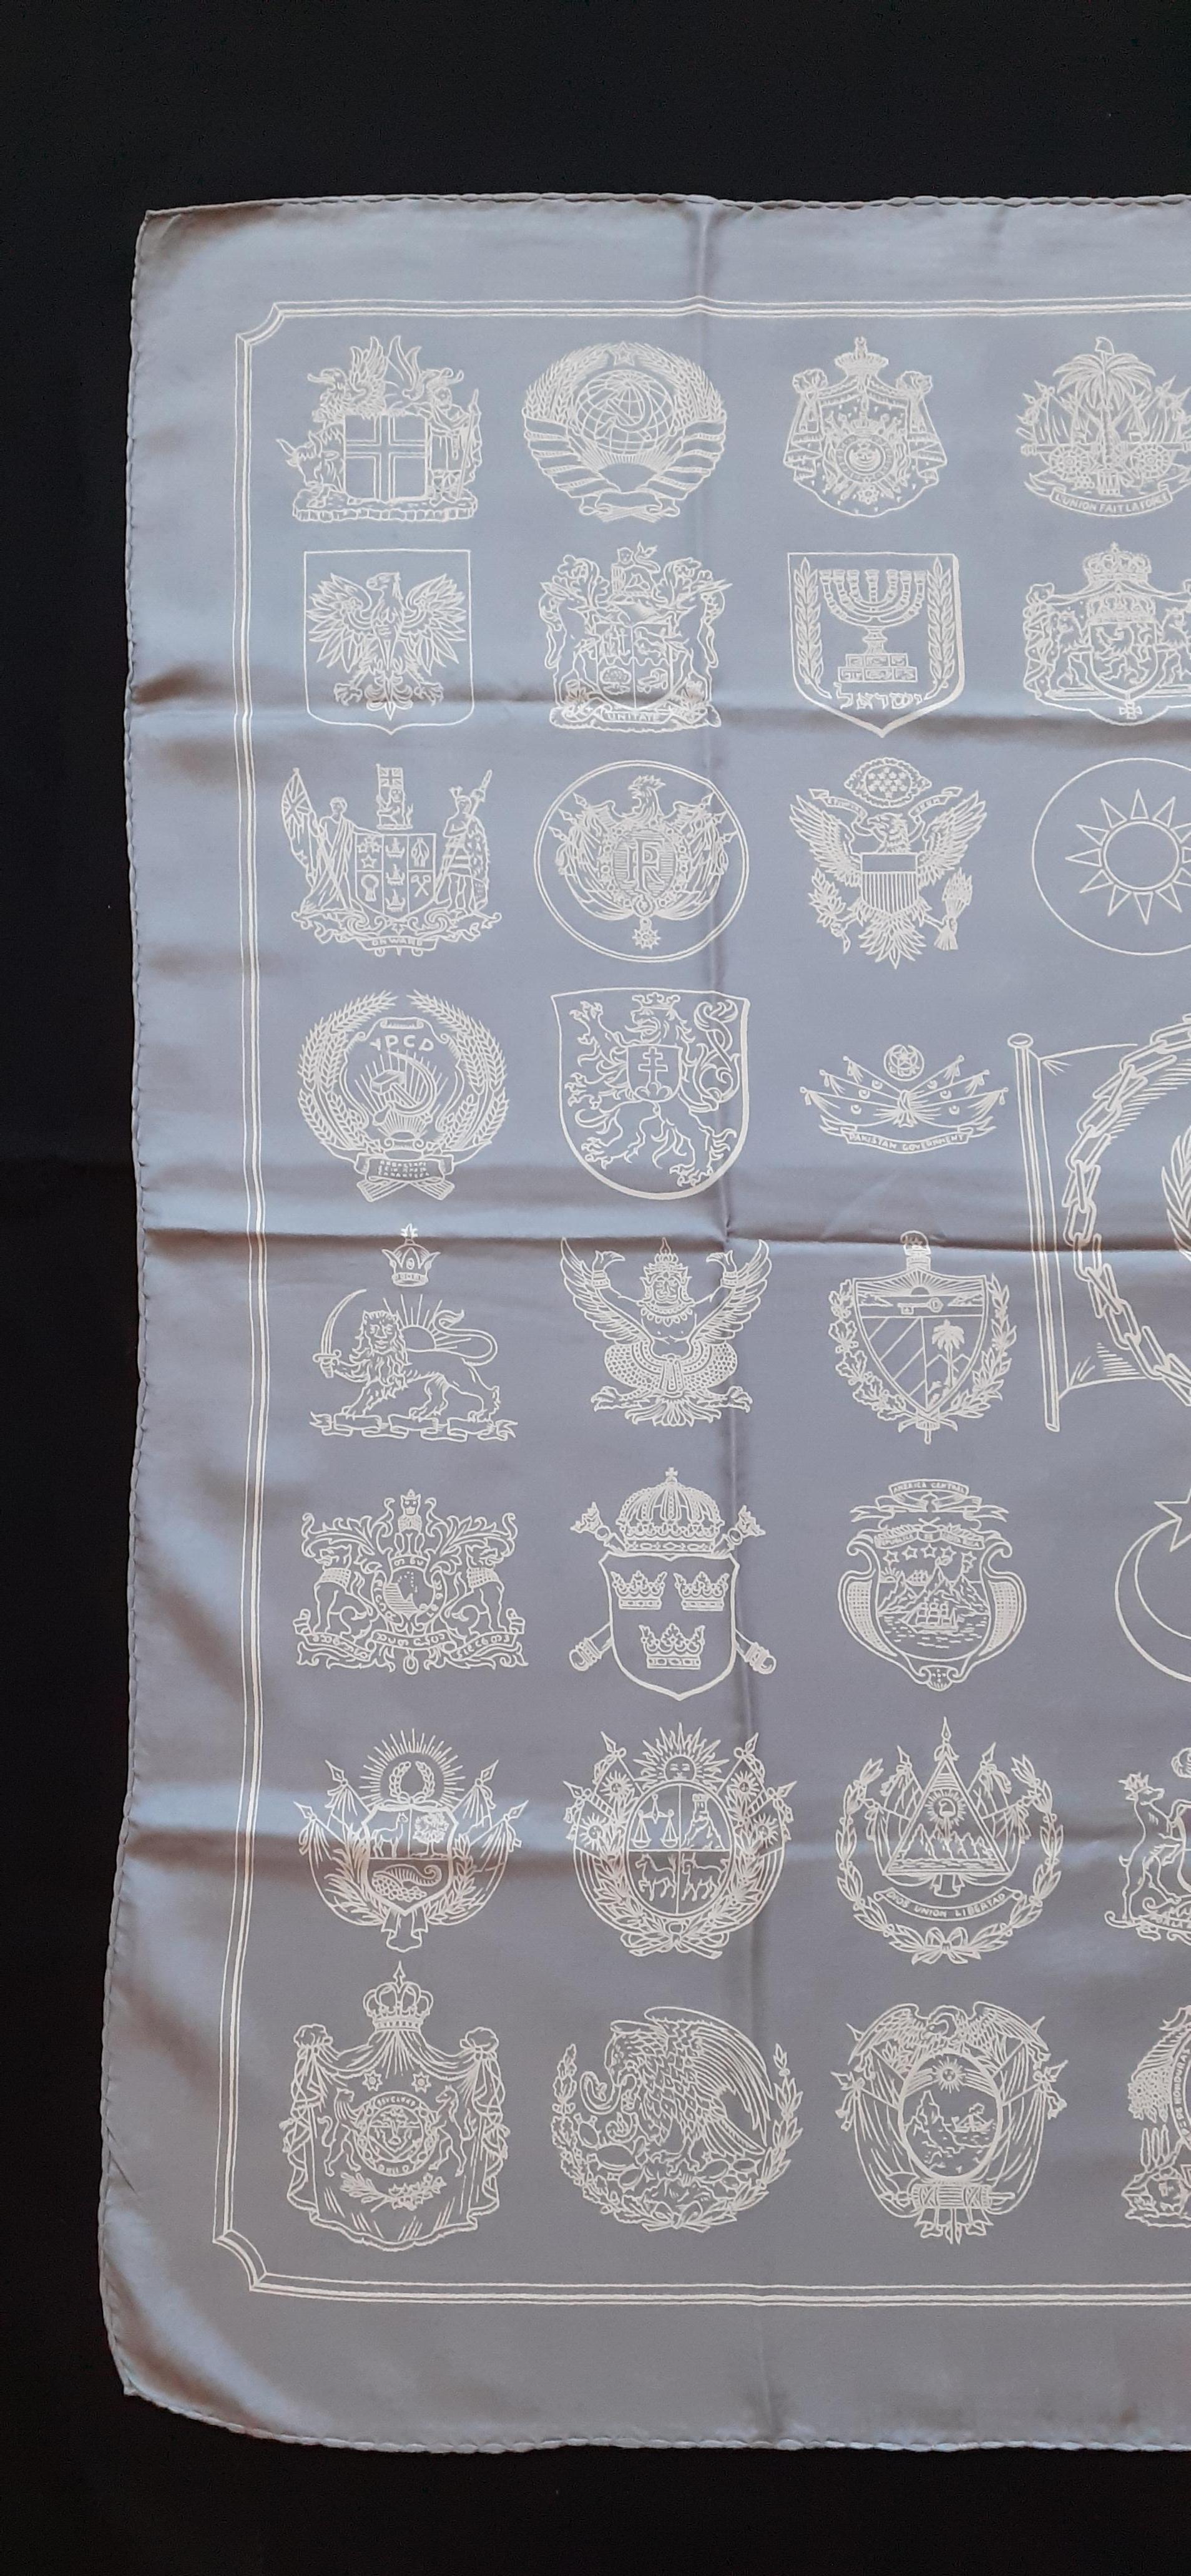 Extremely Rare Authentic Hermès Vintage Scarf

Pattern: 